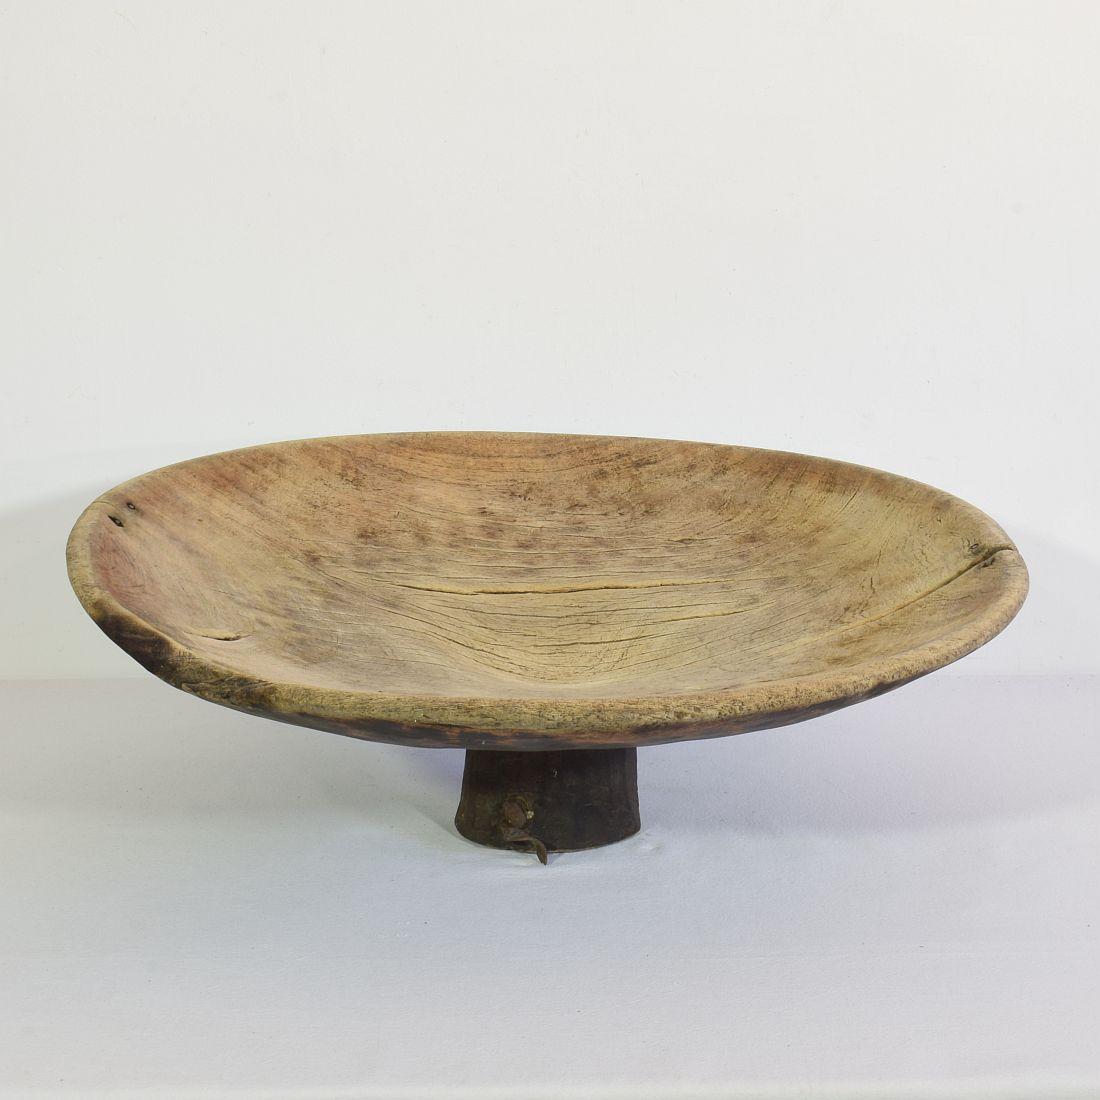 18th-19th Century Moroccan Wooden Couscous / Bread Bowl 1